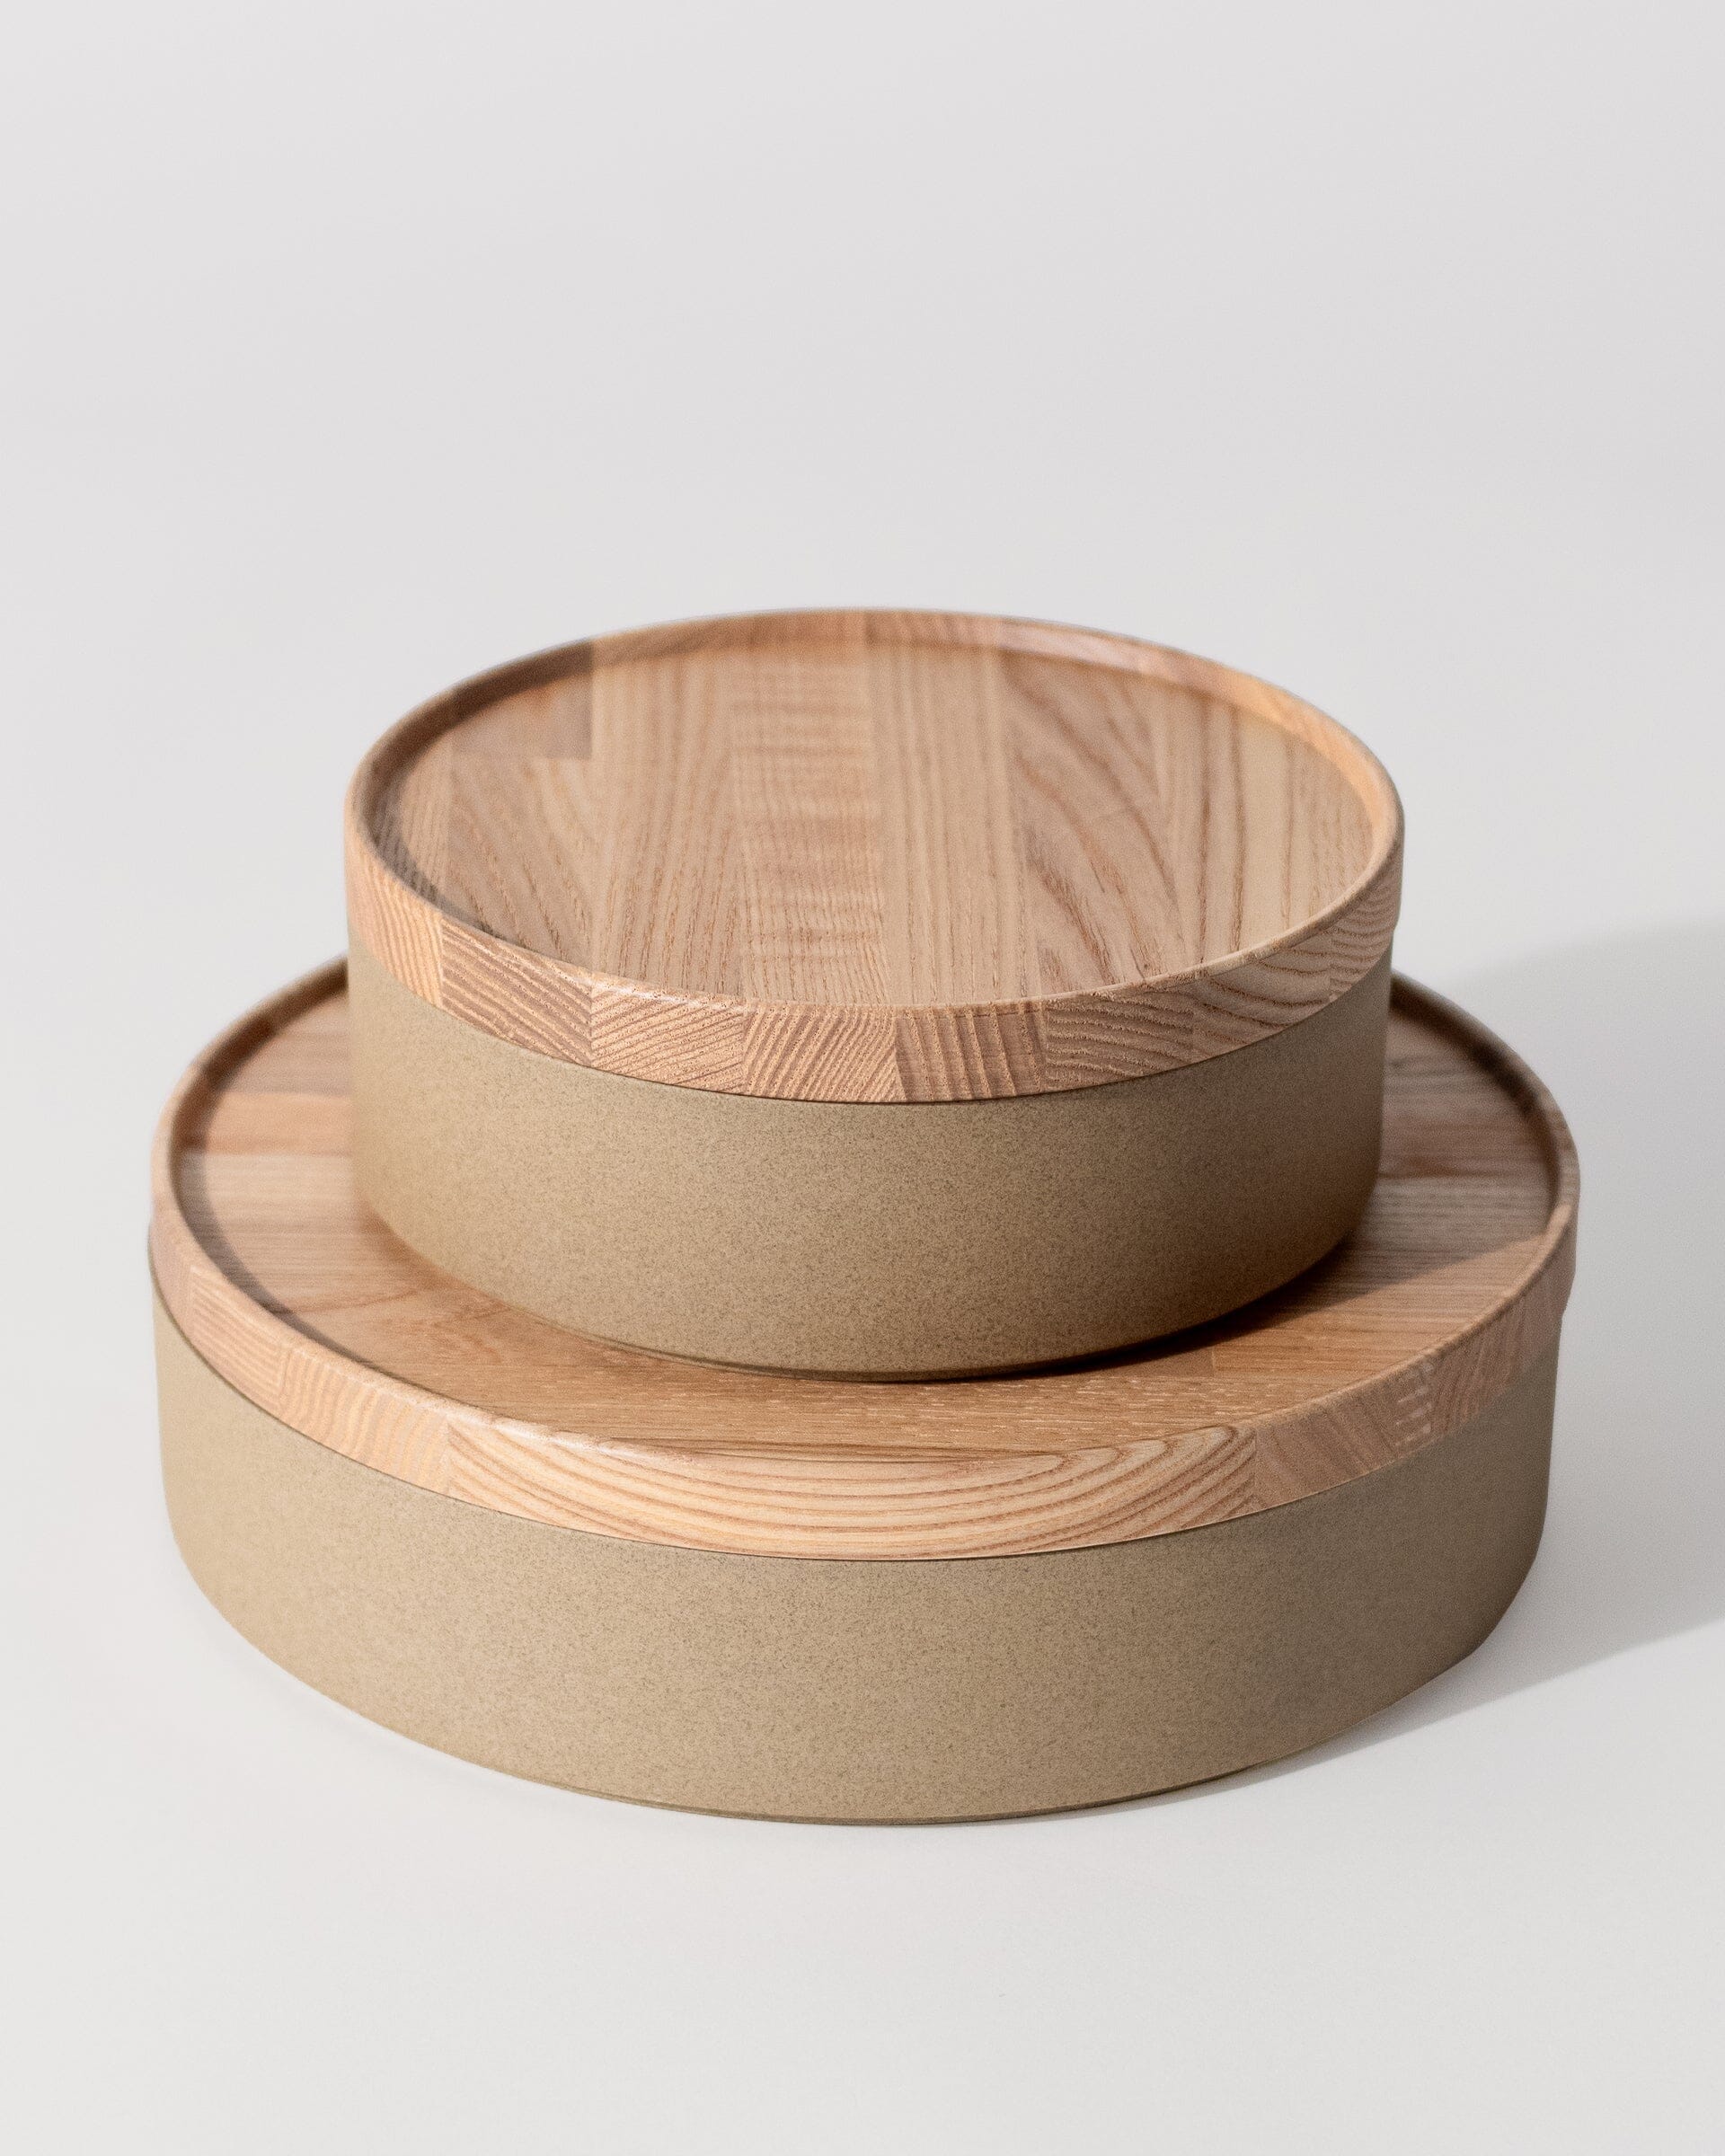 Hasami Porcelain Medium/Large Bowl in Natural with Ash Wooden Tray 